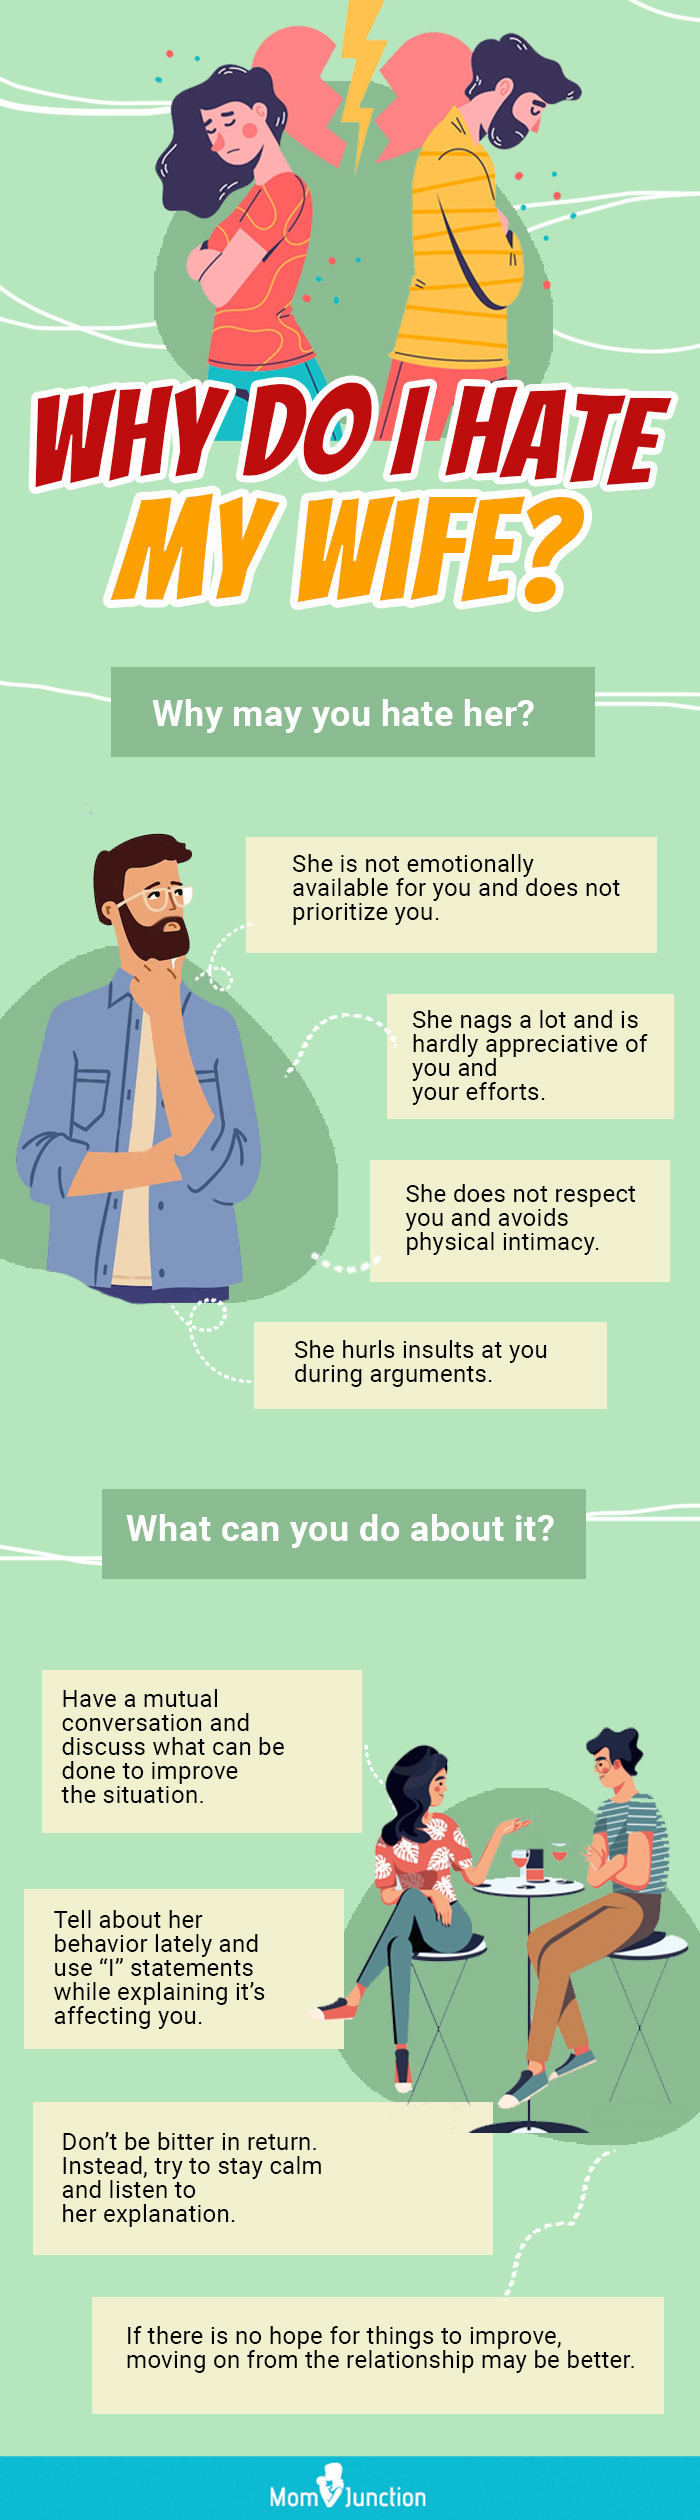 why do i hate my wife? (infographic)